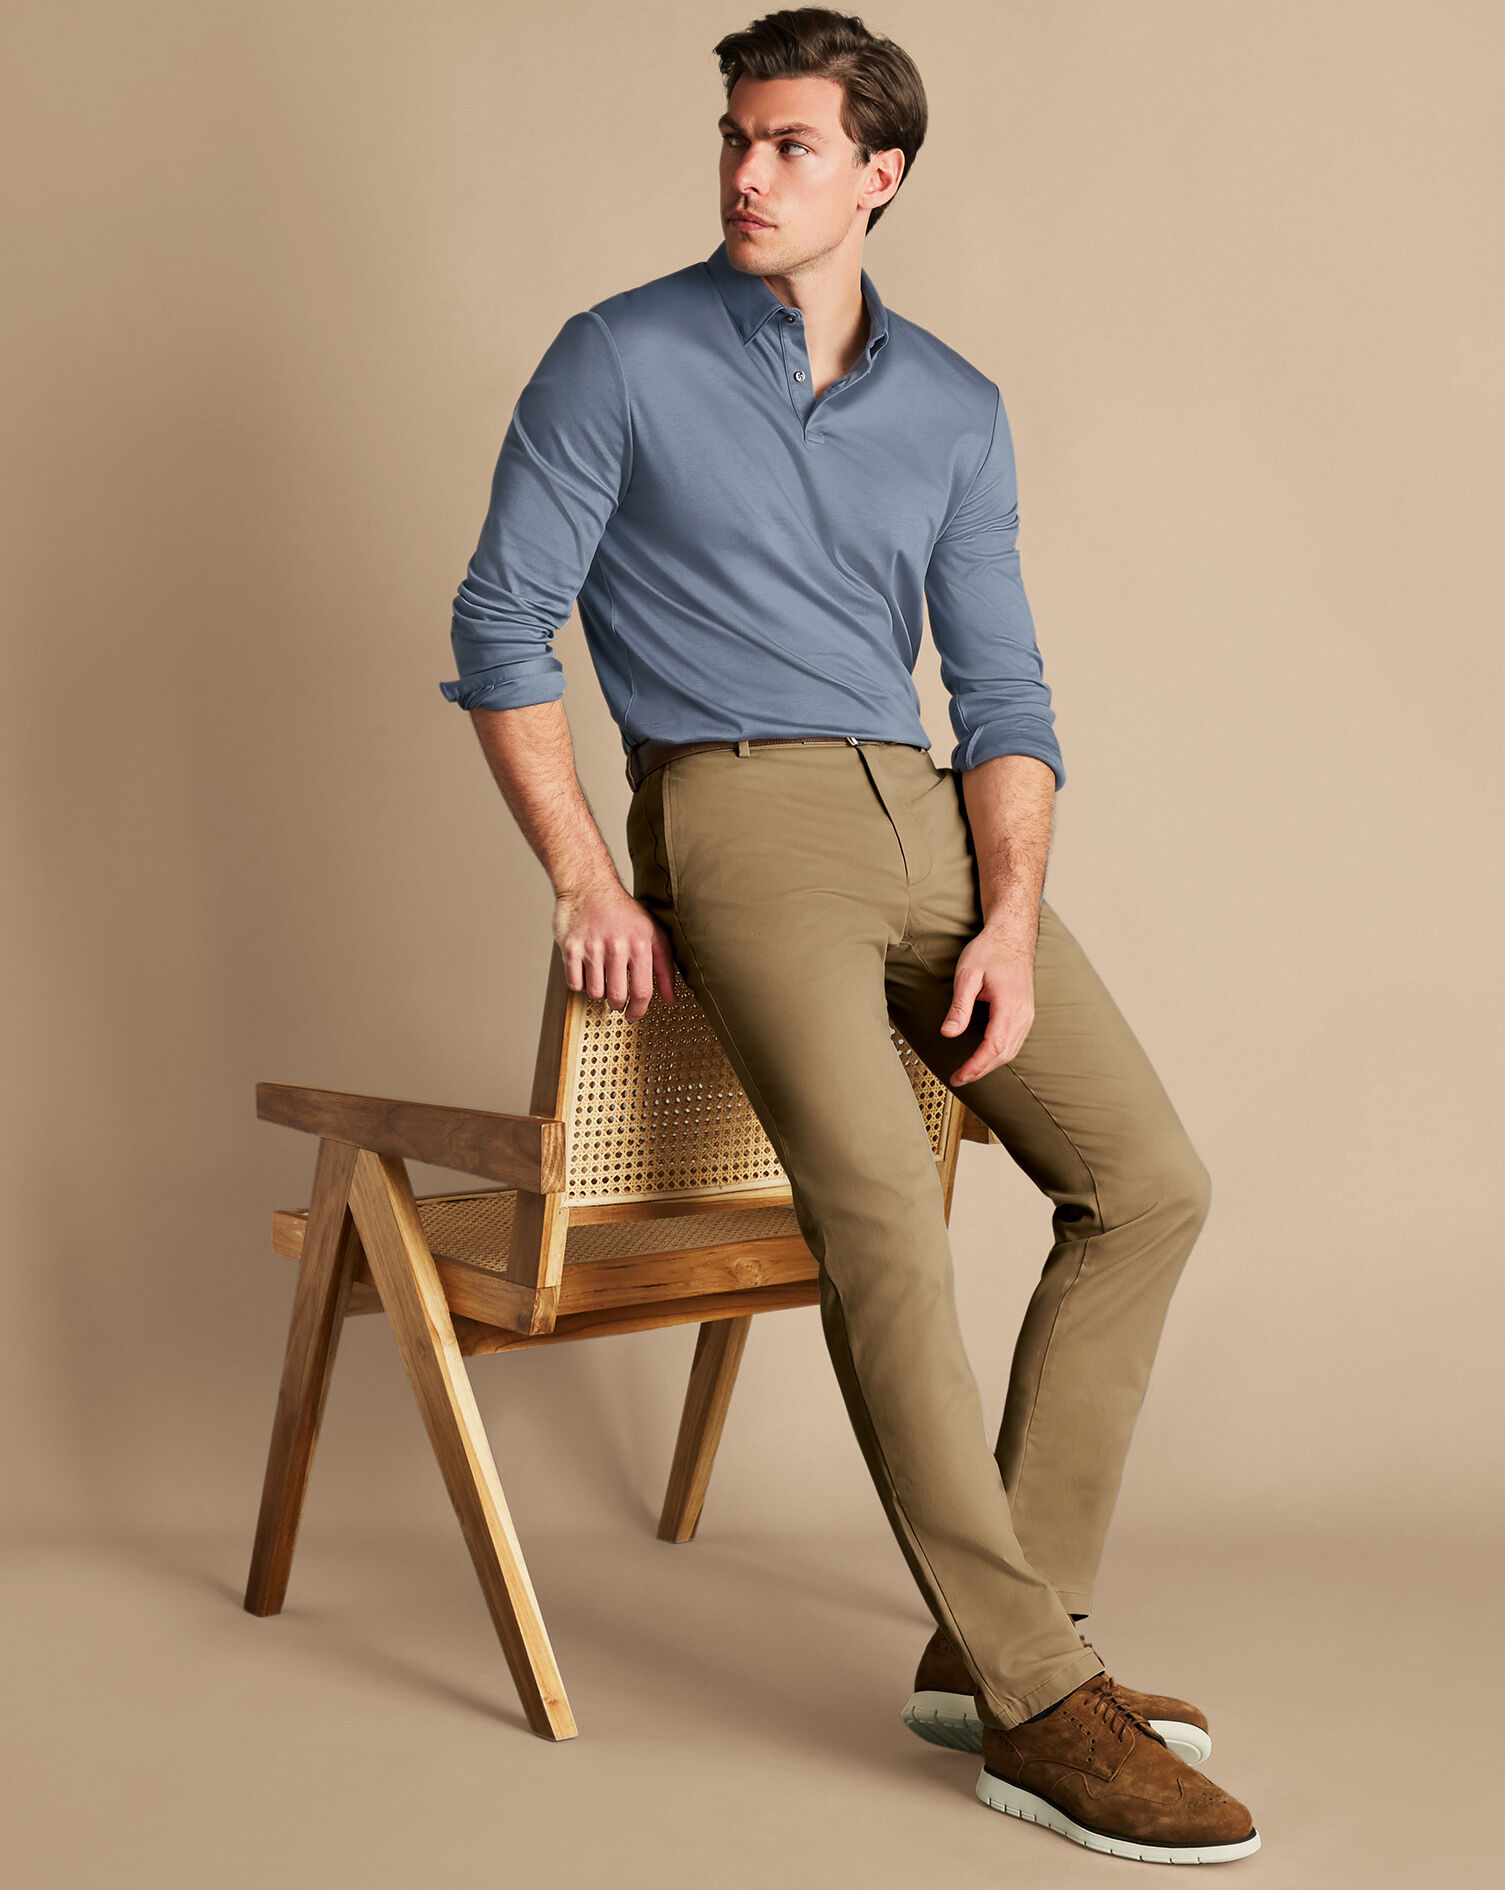 Buy beige chinos for men |stretchable trousers for men | slim fit pants for  men | chinos pants for mens | cotton chinos for men | beige chinos for men slim  fit |